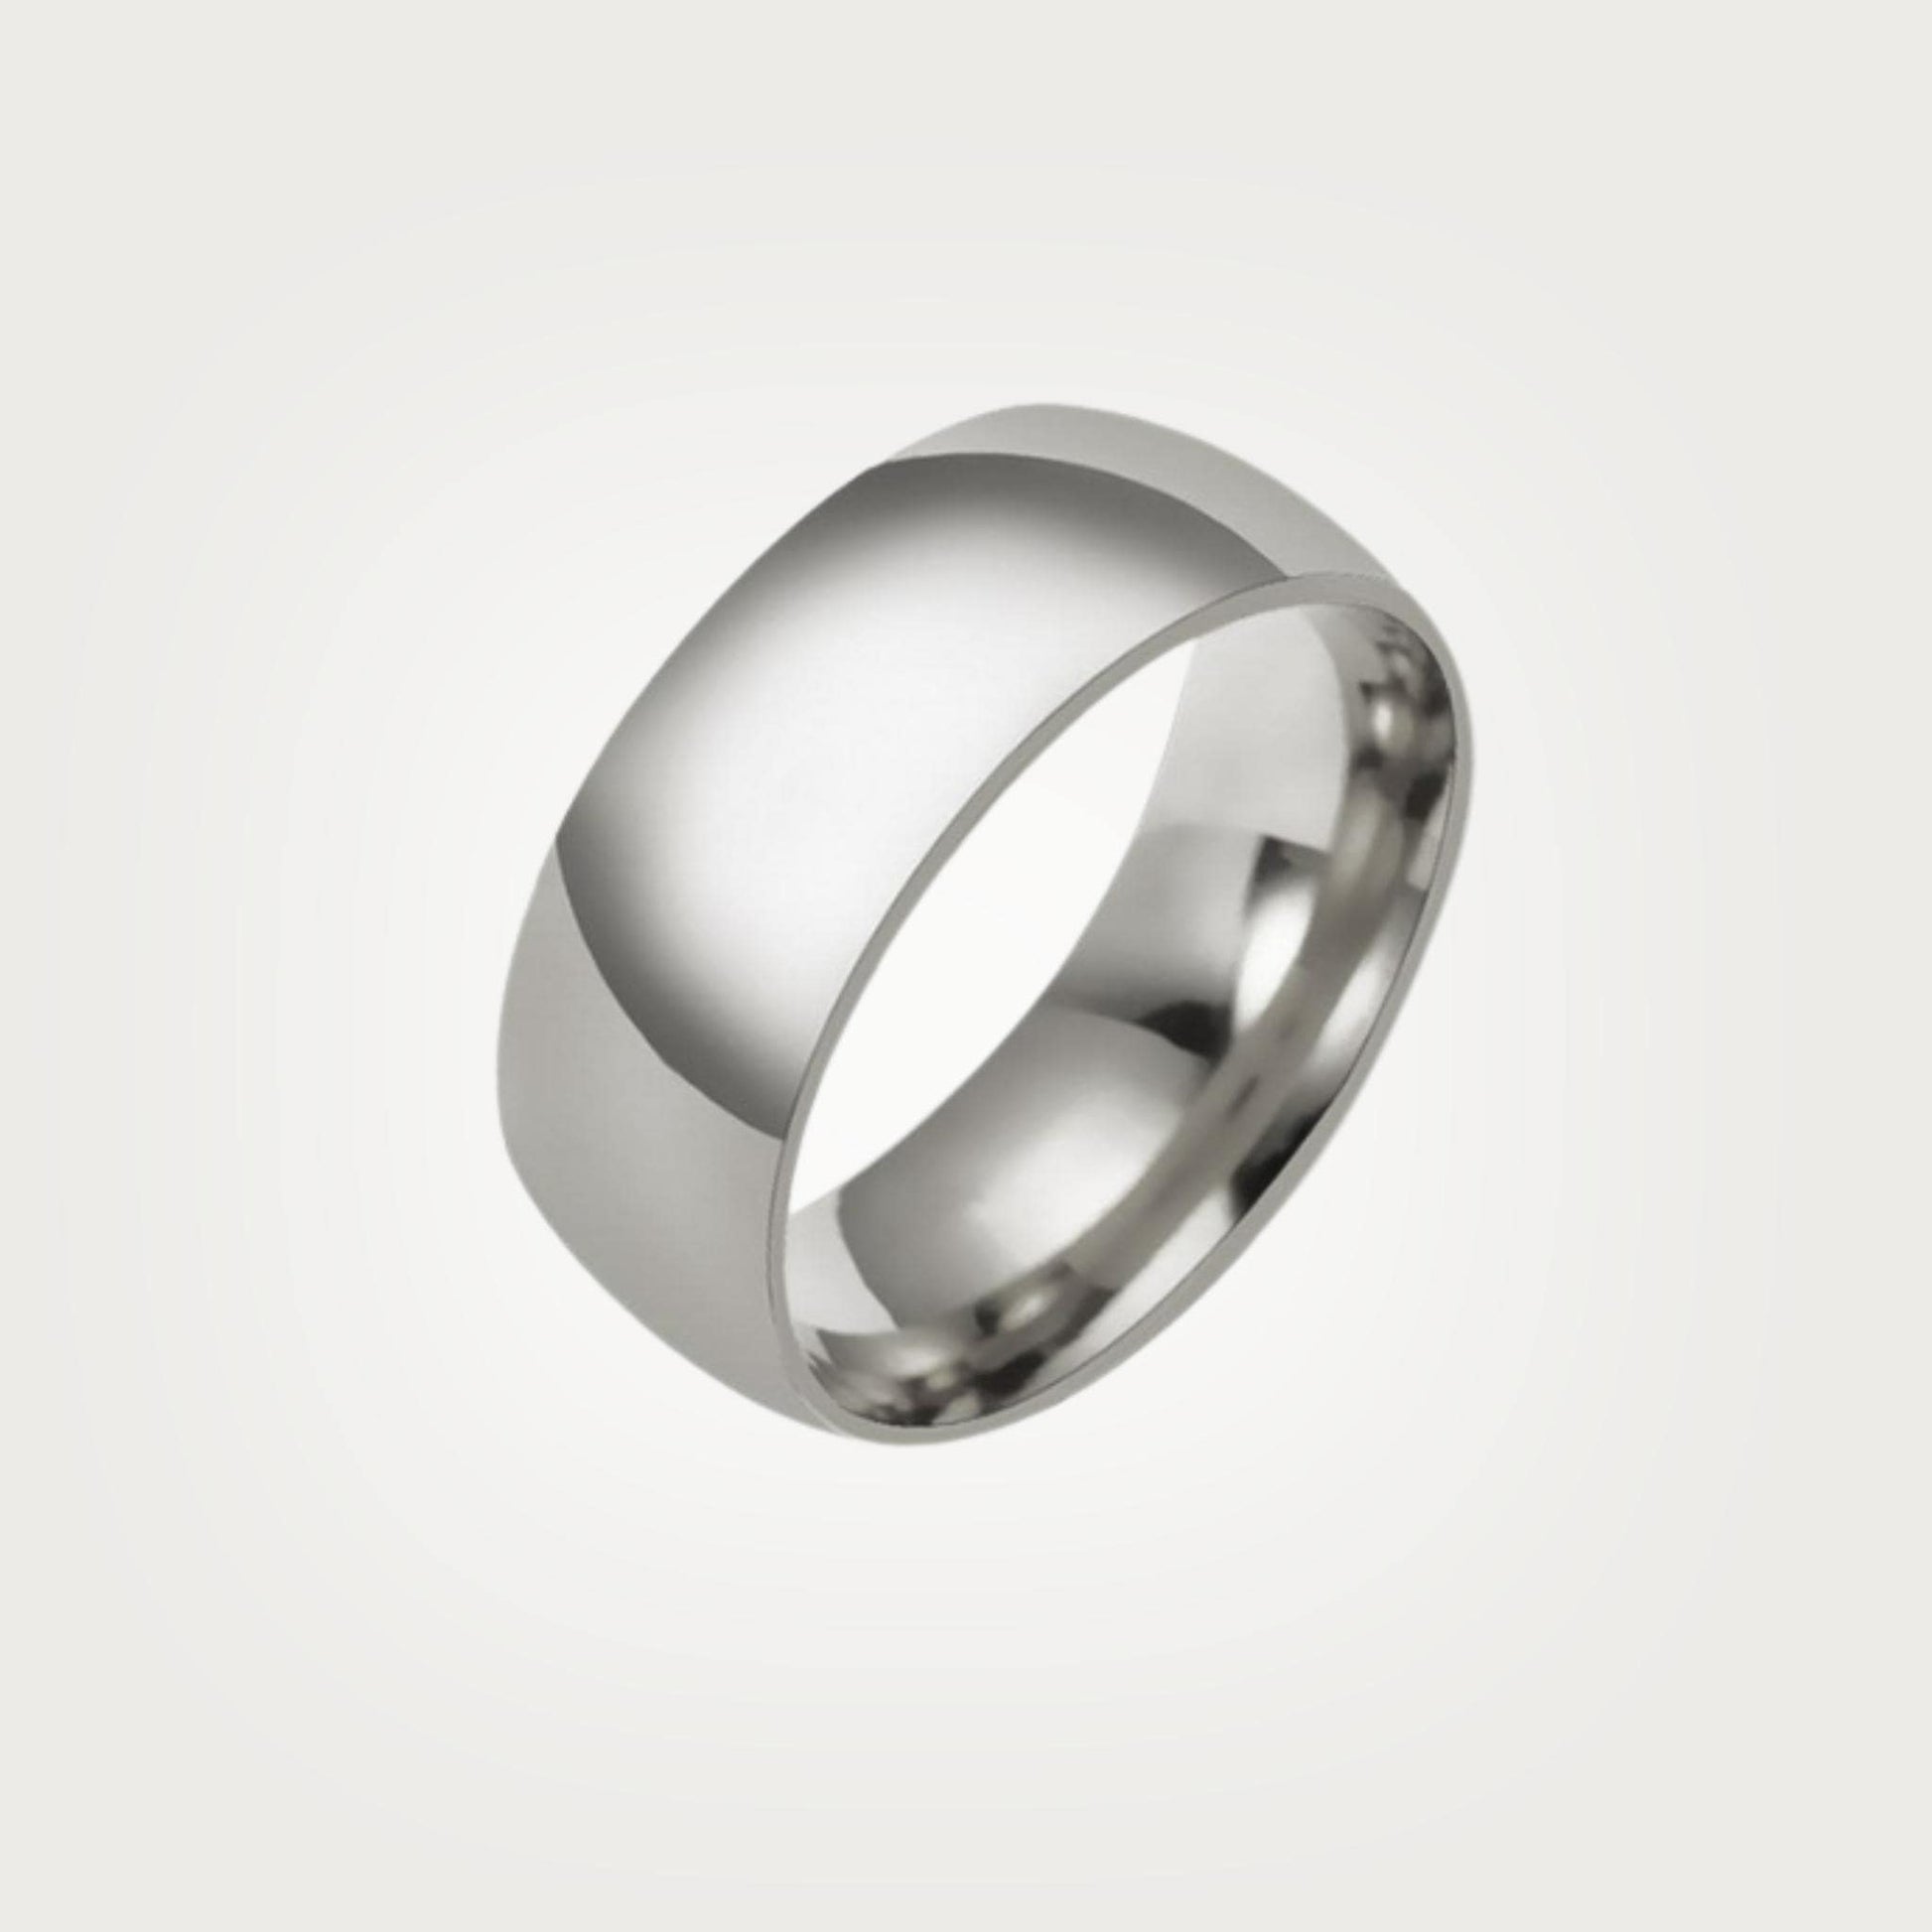 Silver 6mm Classic Ring For Women or Men - Ring - Boutique Wear RENN